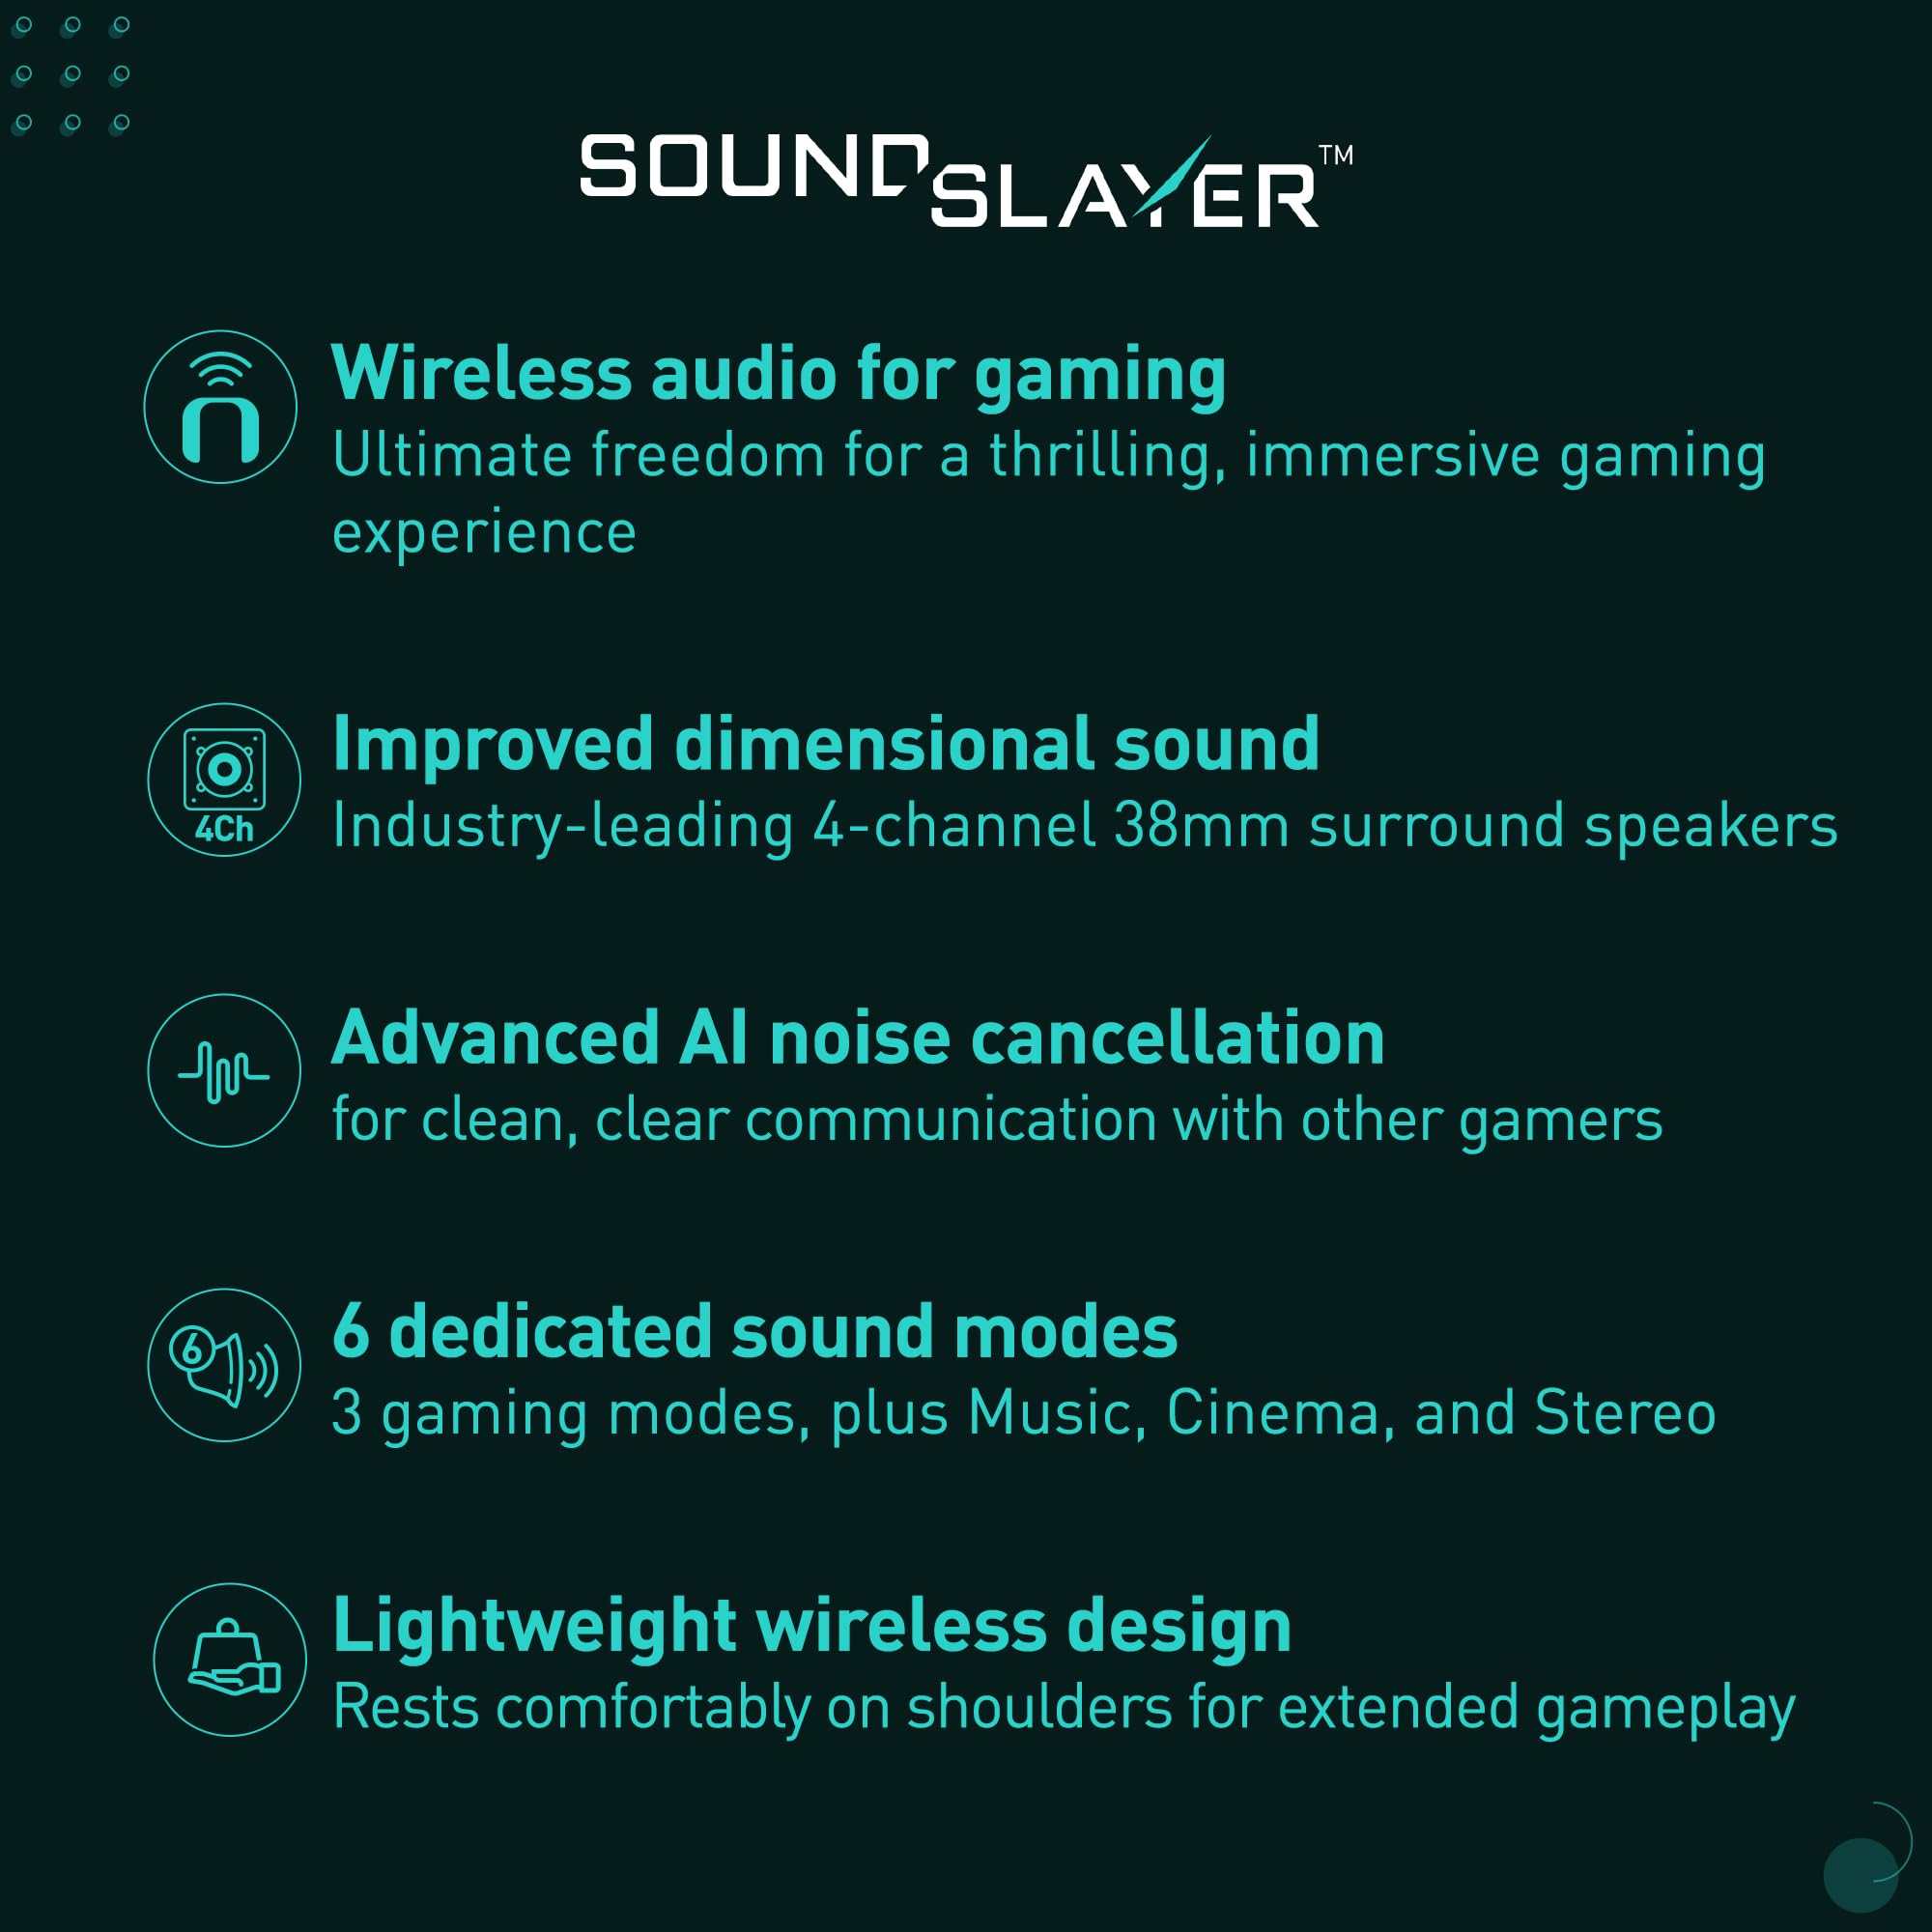 Panasonic SoundSlayer Wireless Wearable Speaker System for Gaming, Movies and Music, Lightweight Neck Speaker with Built-in Microphone and Immersive, Dimensional Sound - SC-GNW10 (Black)